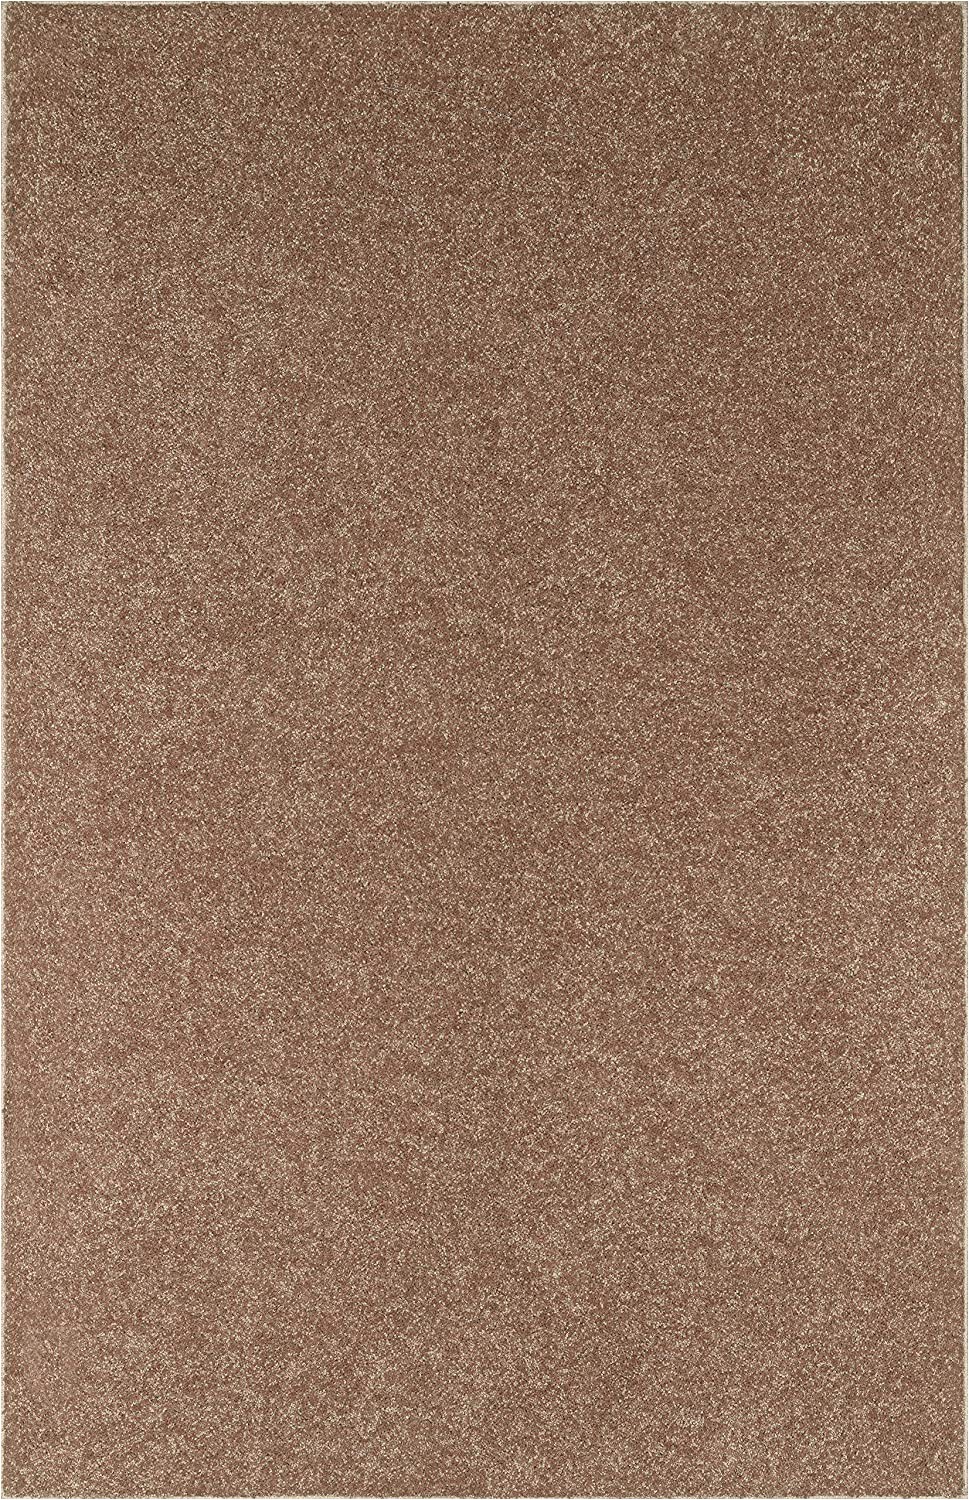 7 X 13 area Rug Ambiant solid Color Oversize area Rug Brown 7 X 13